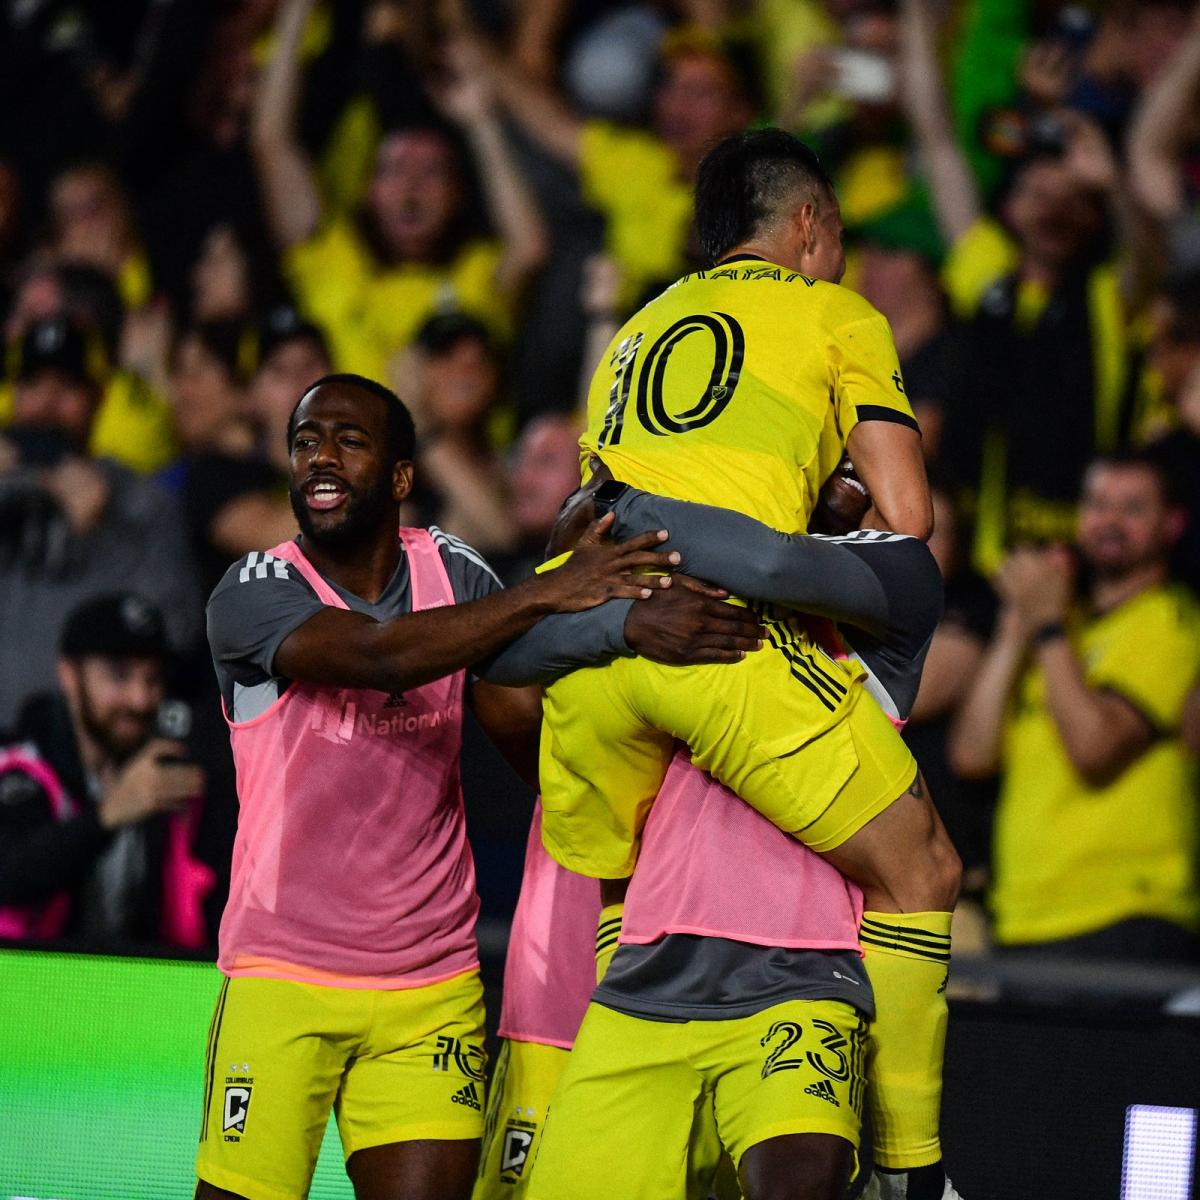 Zelarayan celebrates with teammates after converting a penalty kick. Photo courtesy of The Columbus Crew